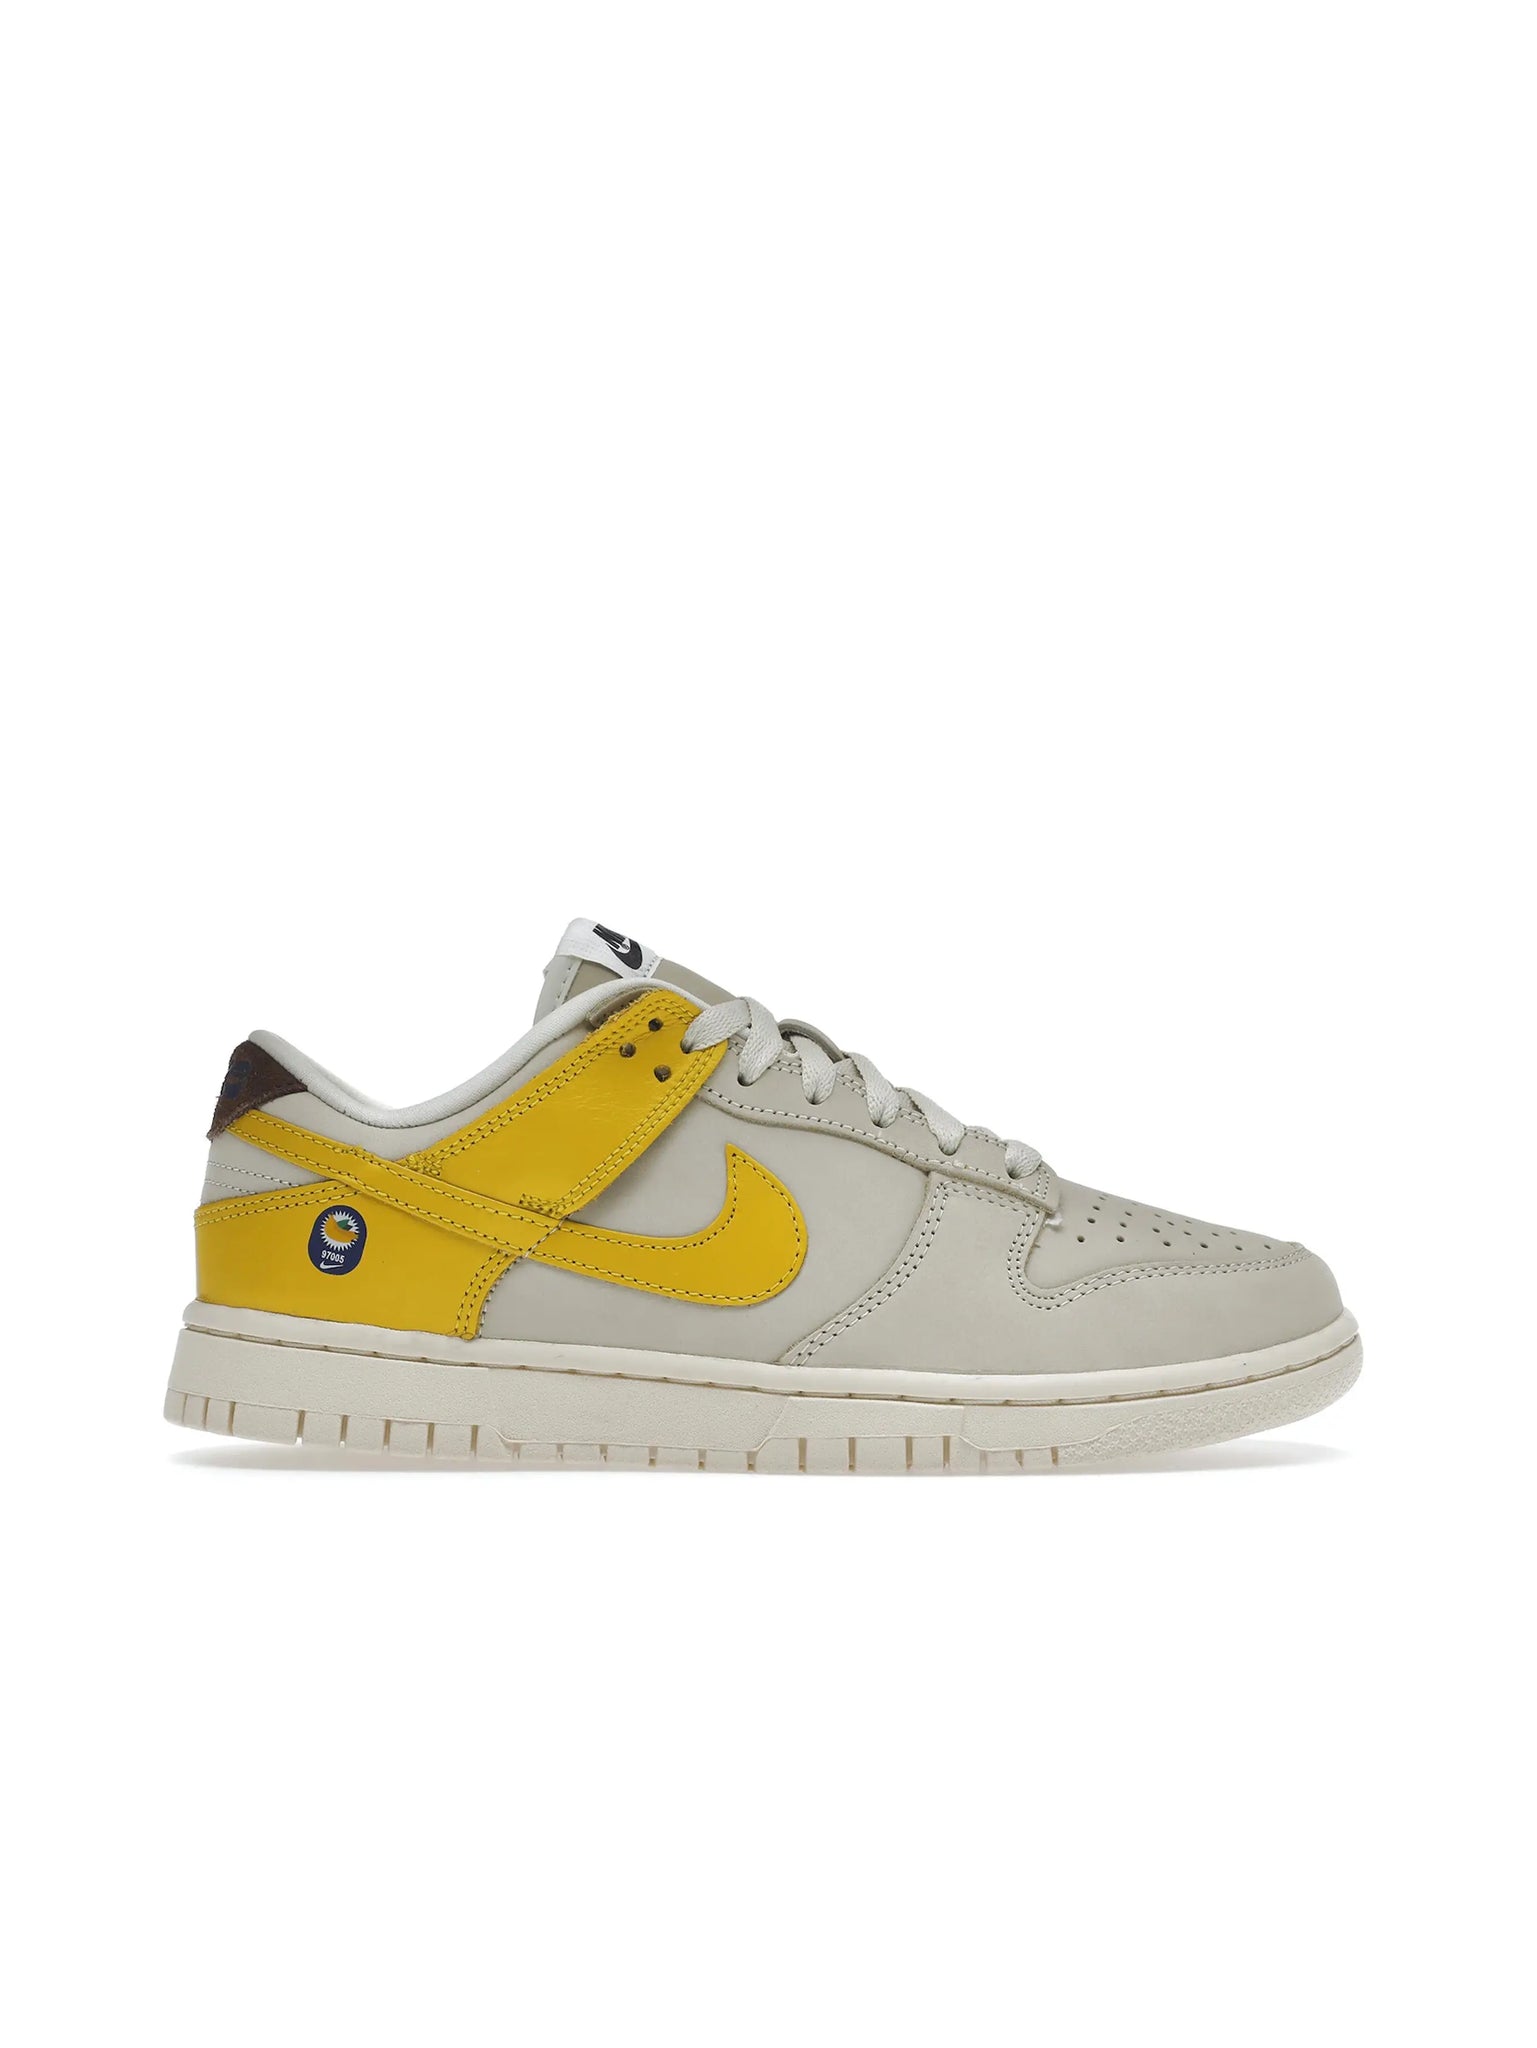 Nike Dunk Low LX Banana (W) in Auckland, New Zealand - Shop name